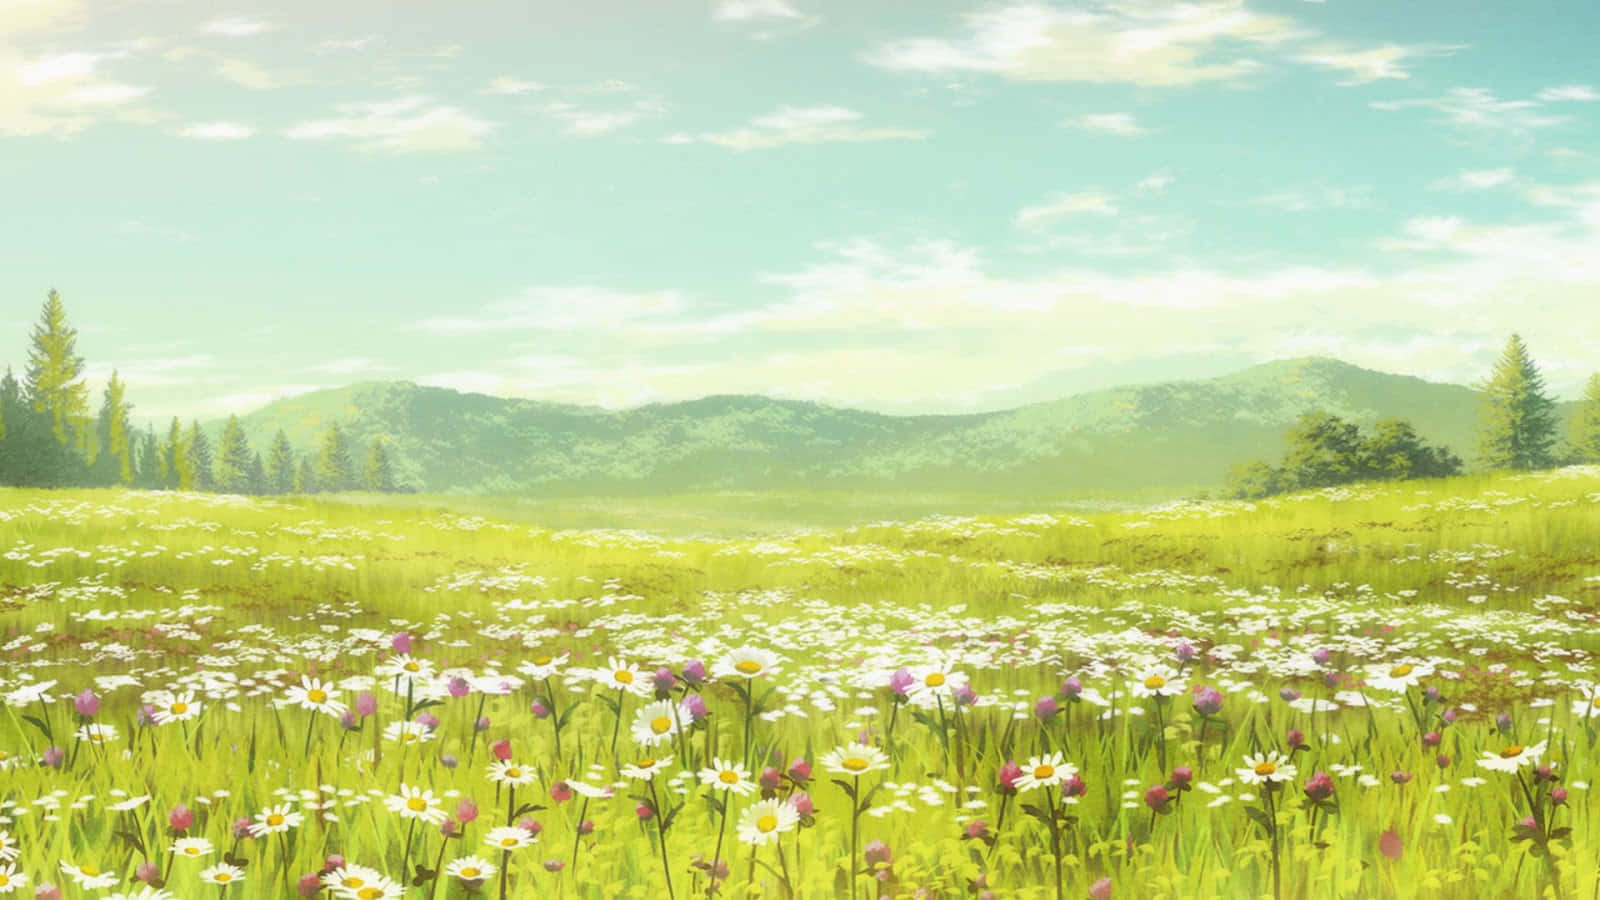 original characters Anime girls Sky Dress Flowers HD Wallpapers   Desktop and Mobile Images  Photos